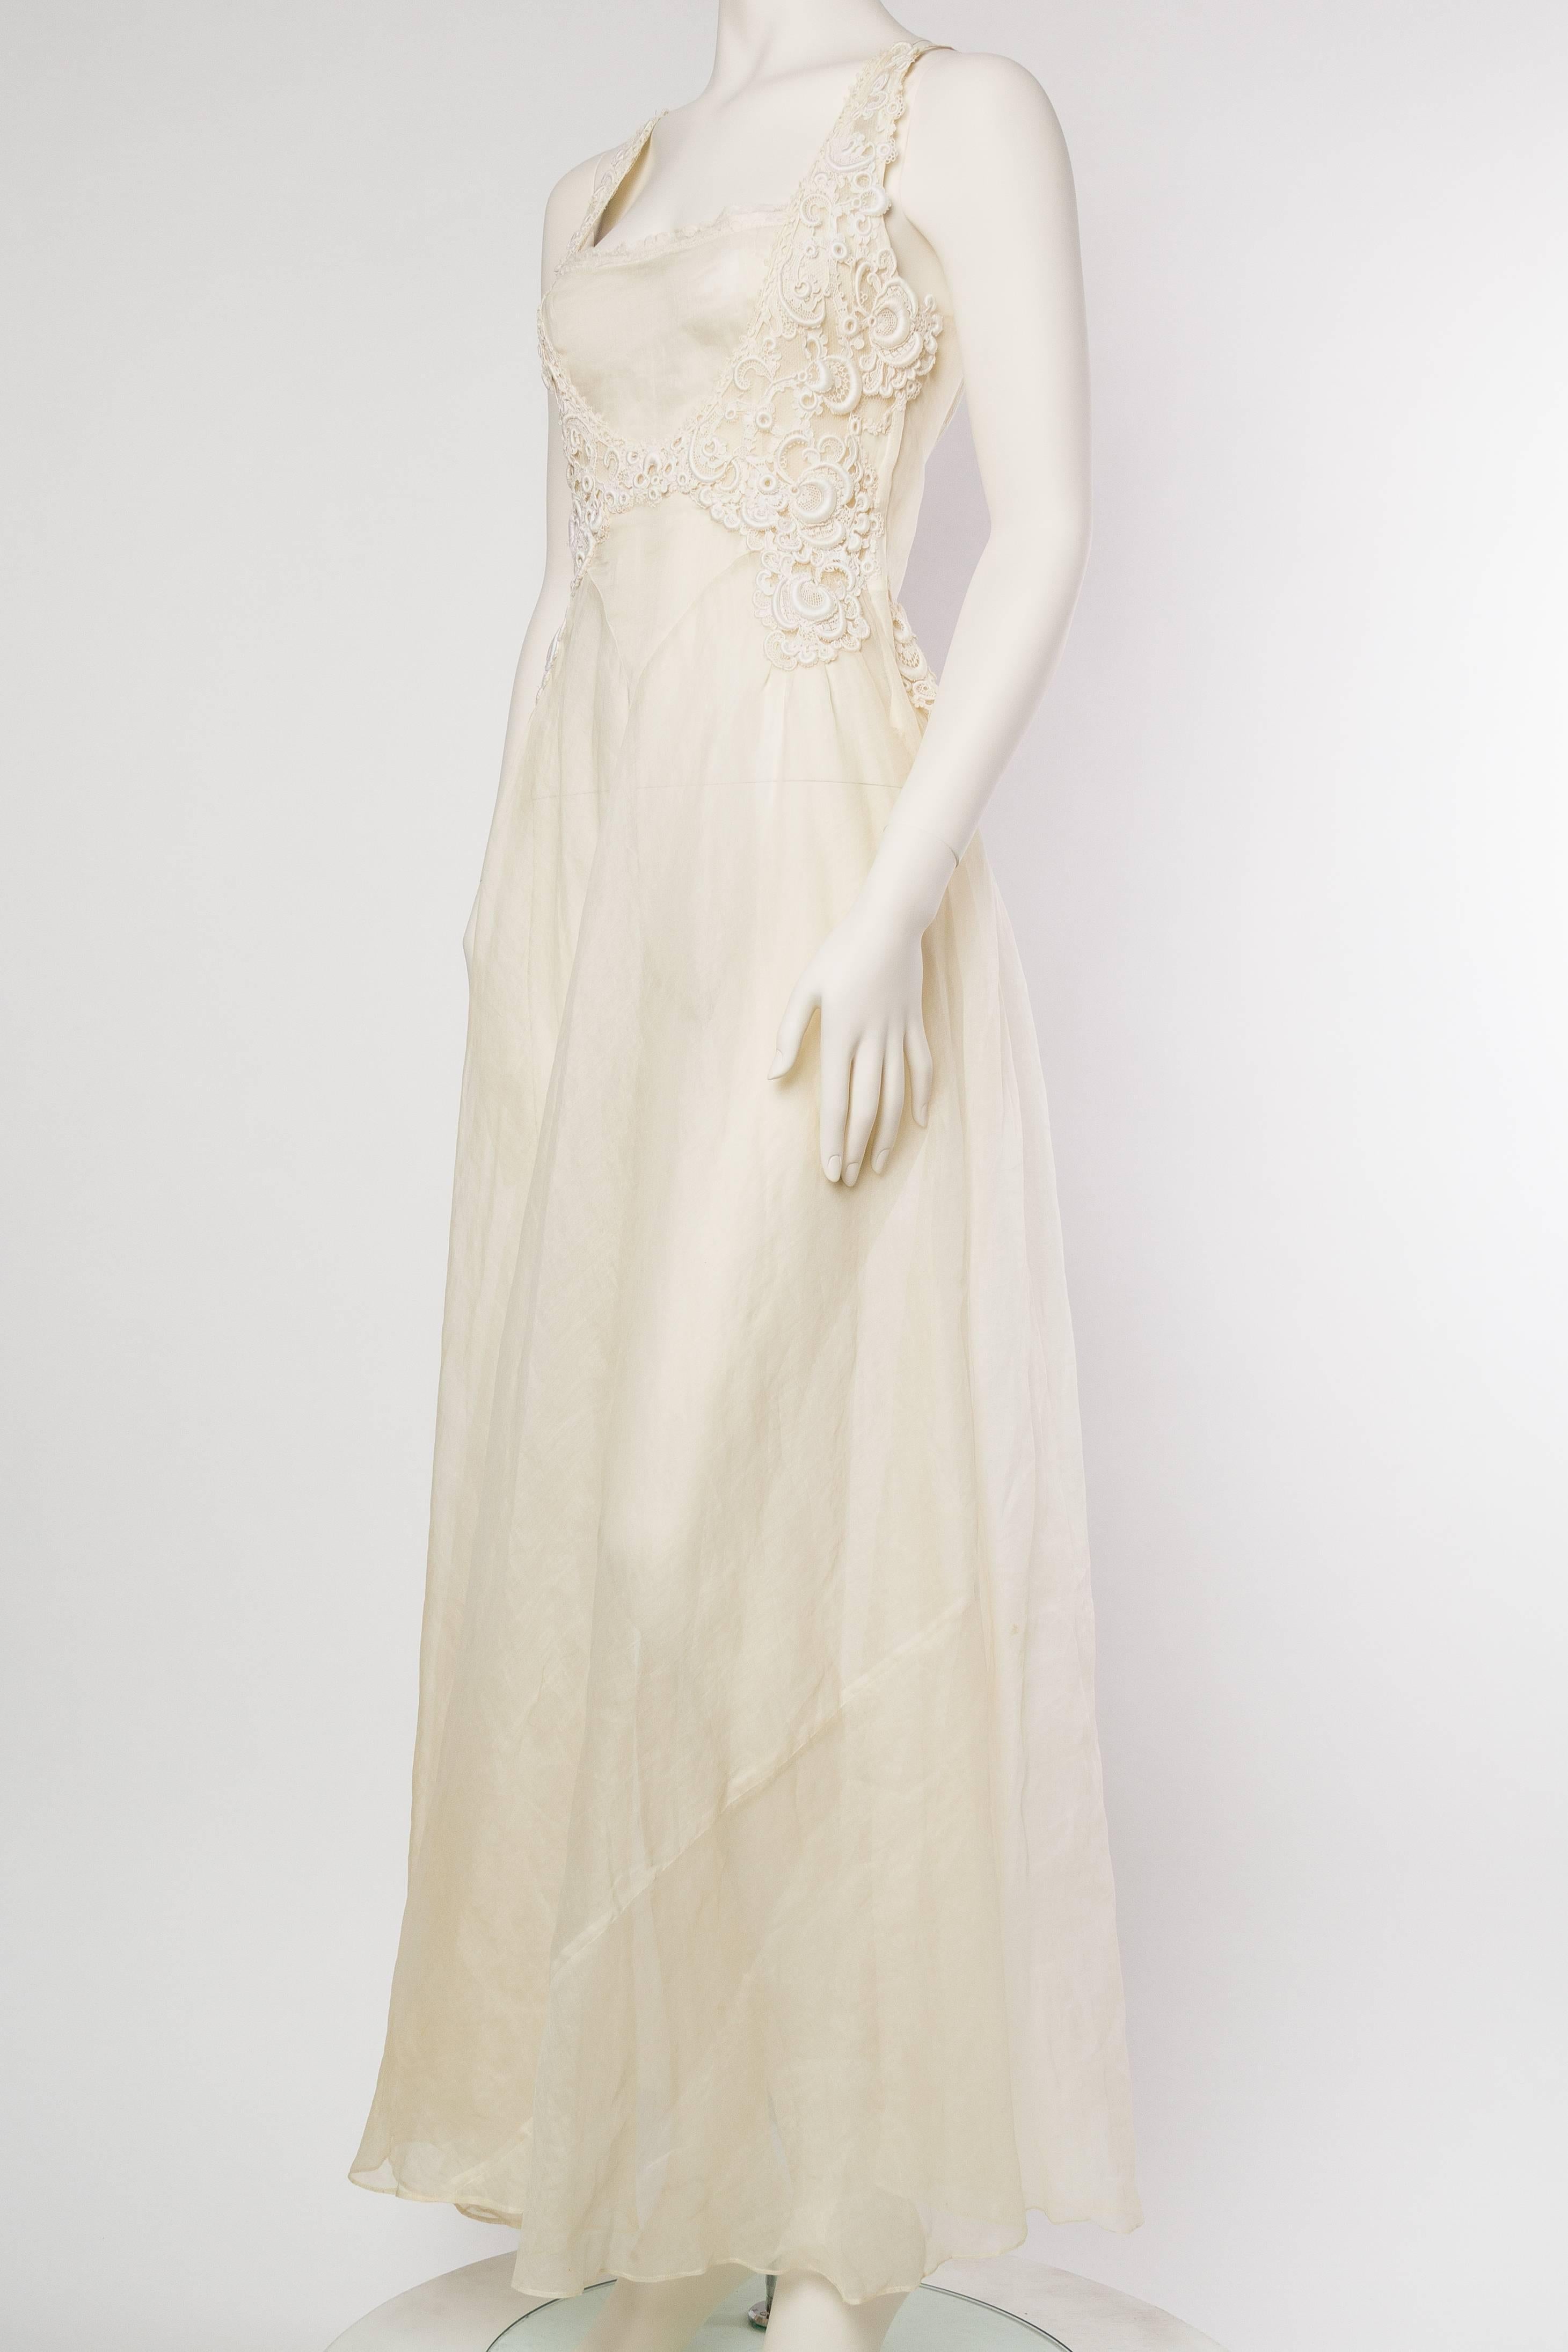 Alexander McQueen Inspired re-worked 1930s Lace Dress In Excellent Condition In New York, NY